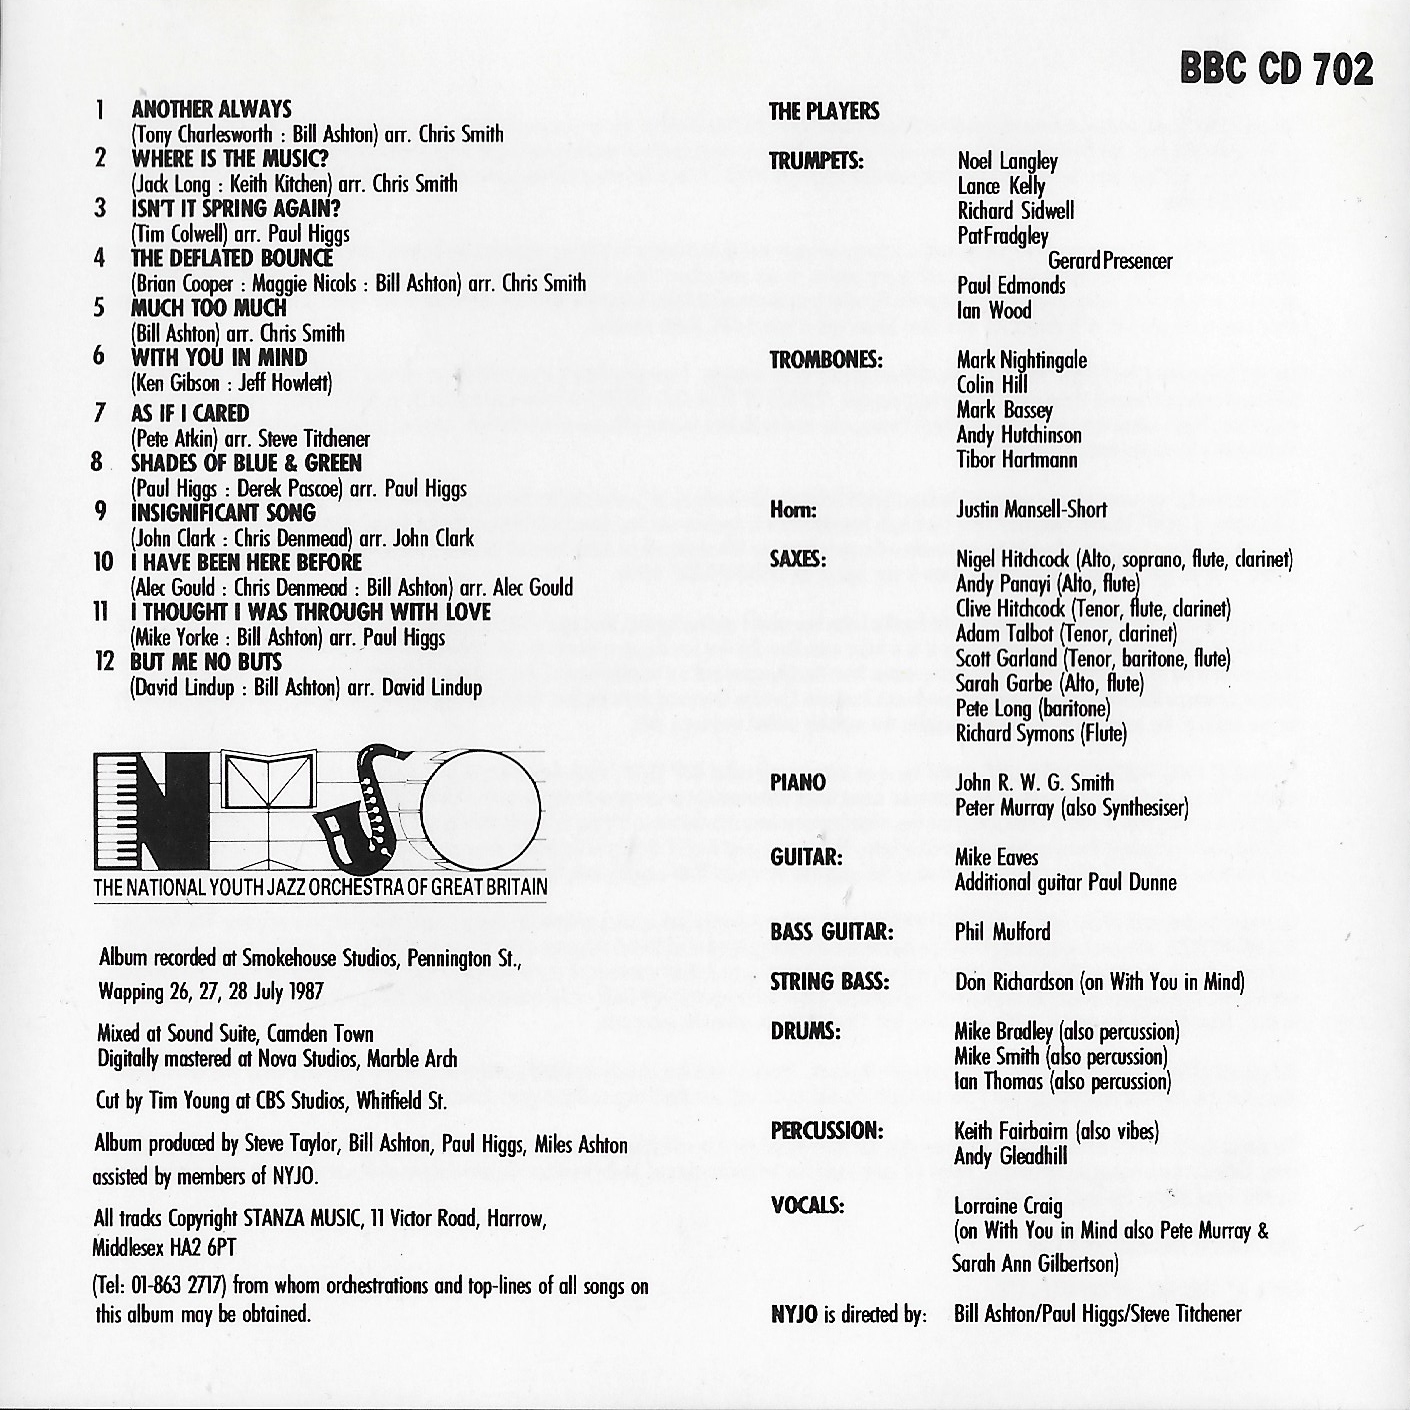 Back cover of BBCCD702